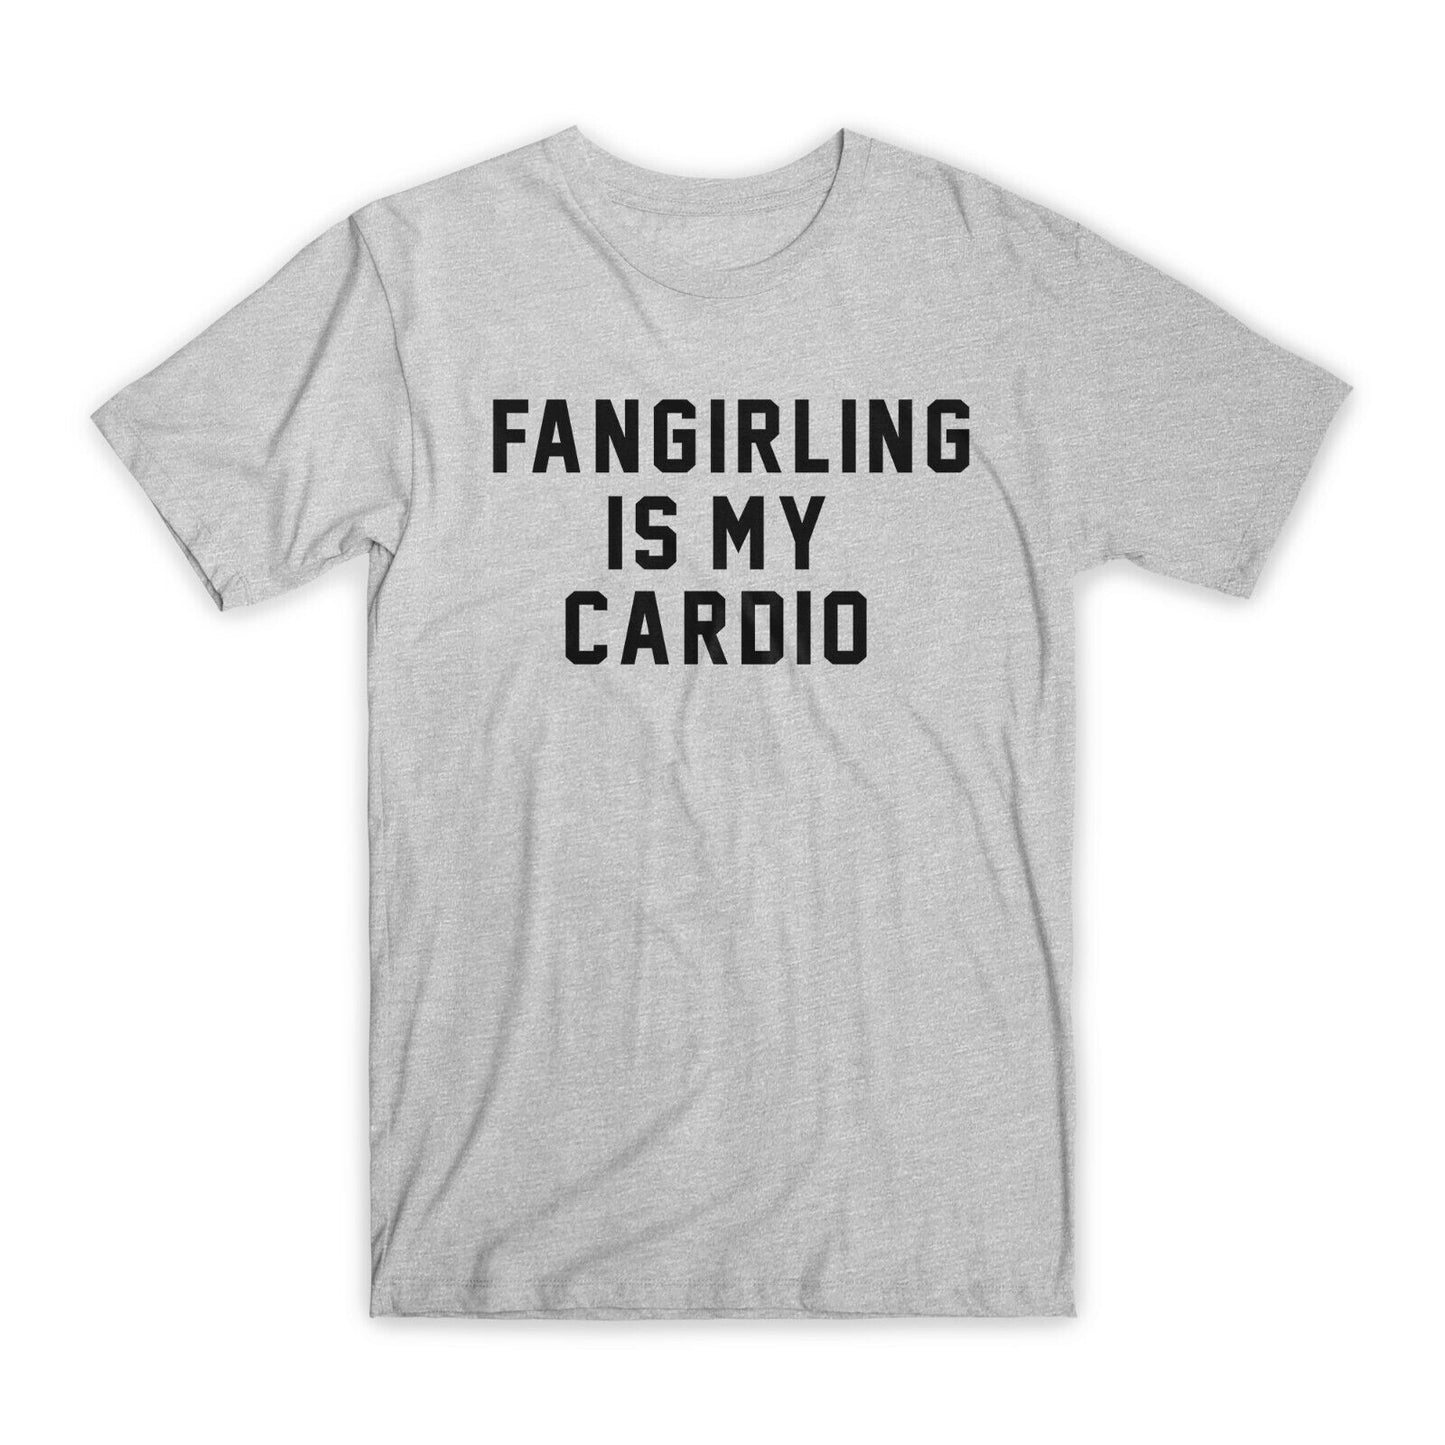 Fangirling is My Cardio T-Shirt Premium Soft Cotton Crew Neck Funny Tee Gift NEW